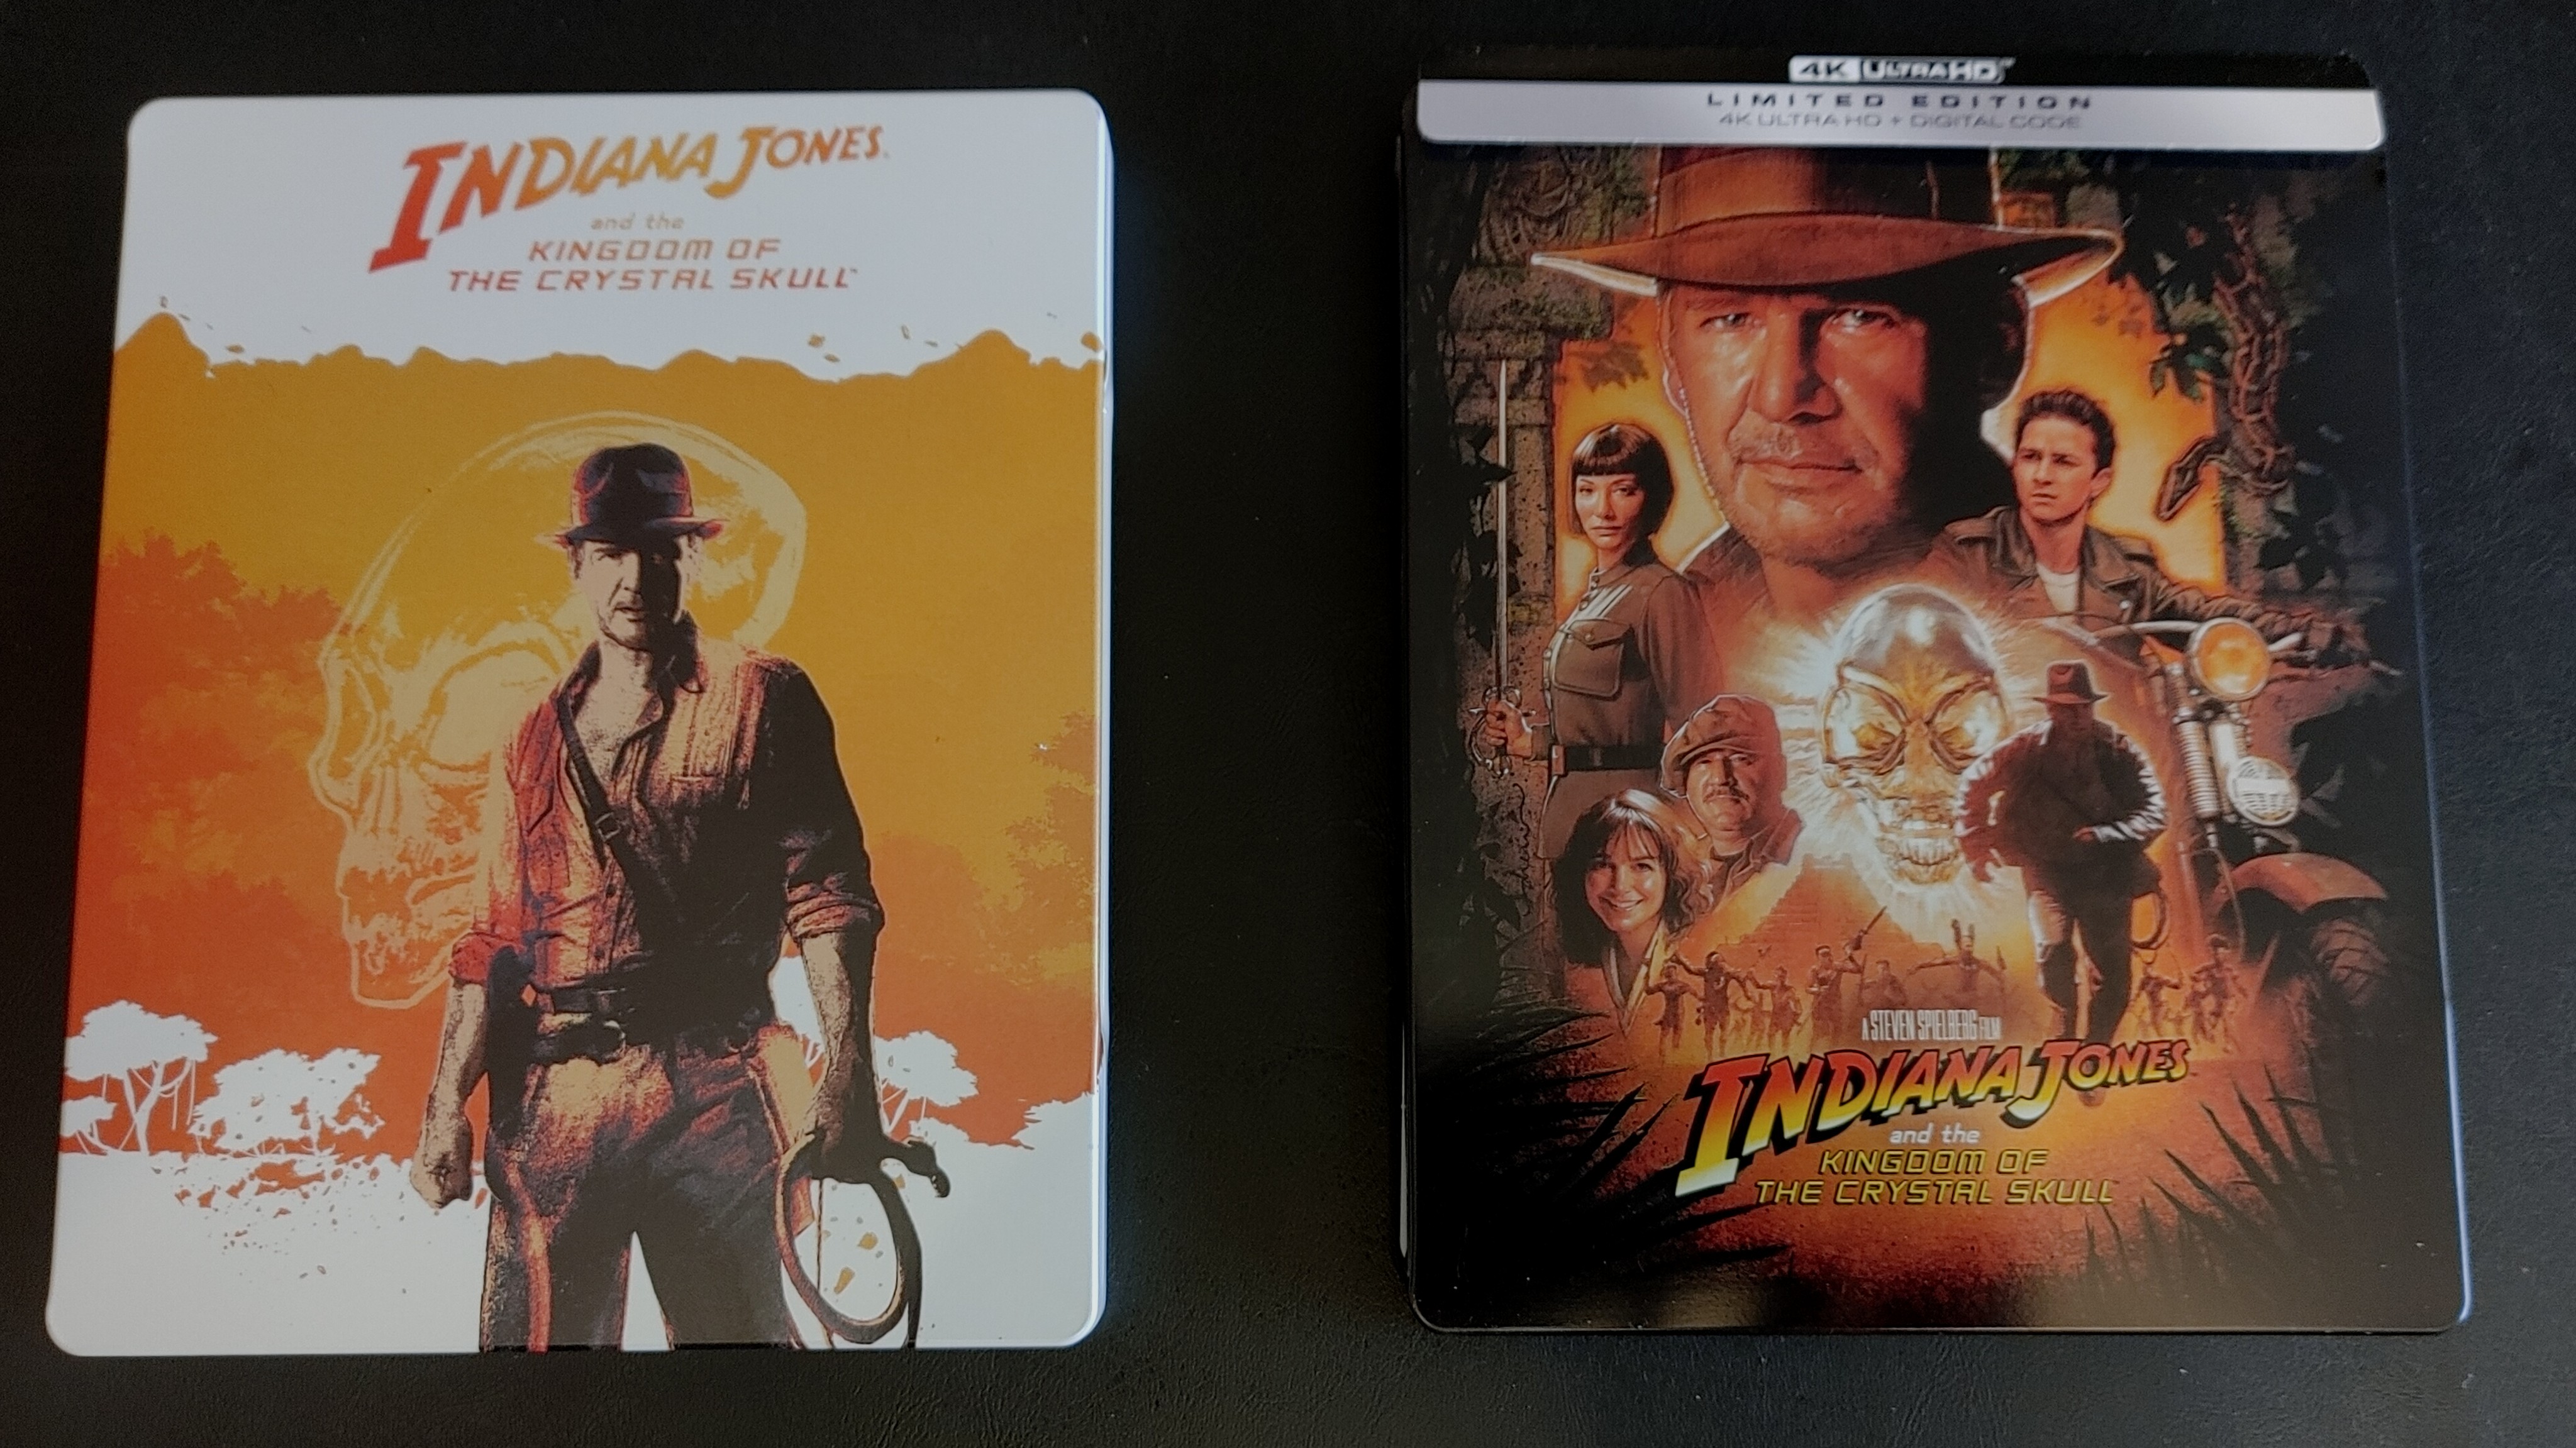 Indiana Jones And The Kingdom Of The Crystal Skull (blu-ray)(2008) : Target